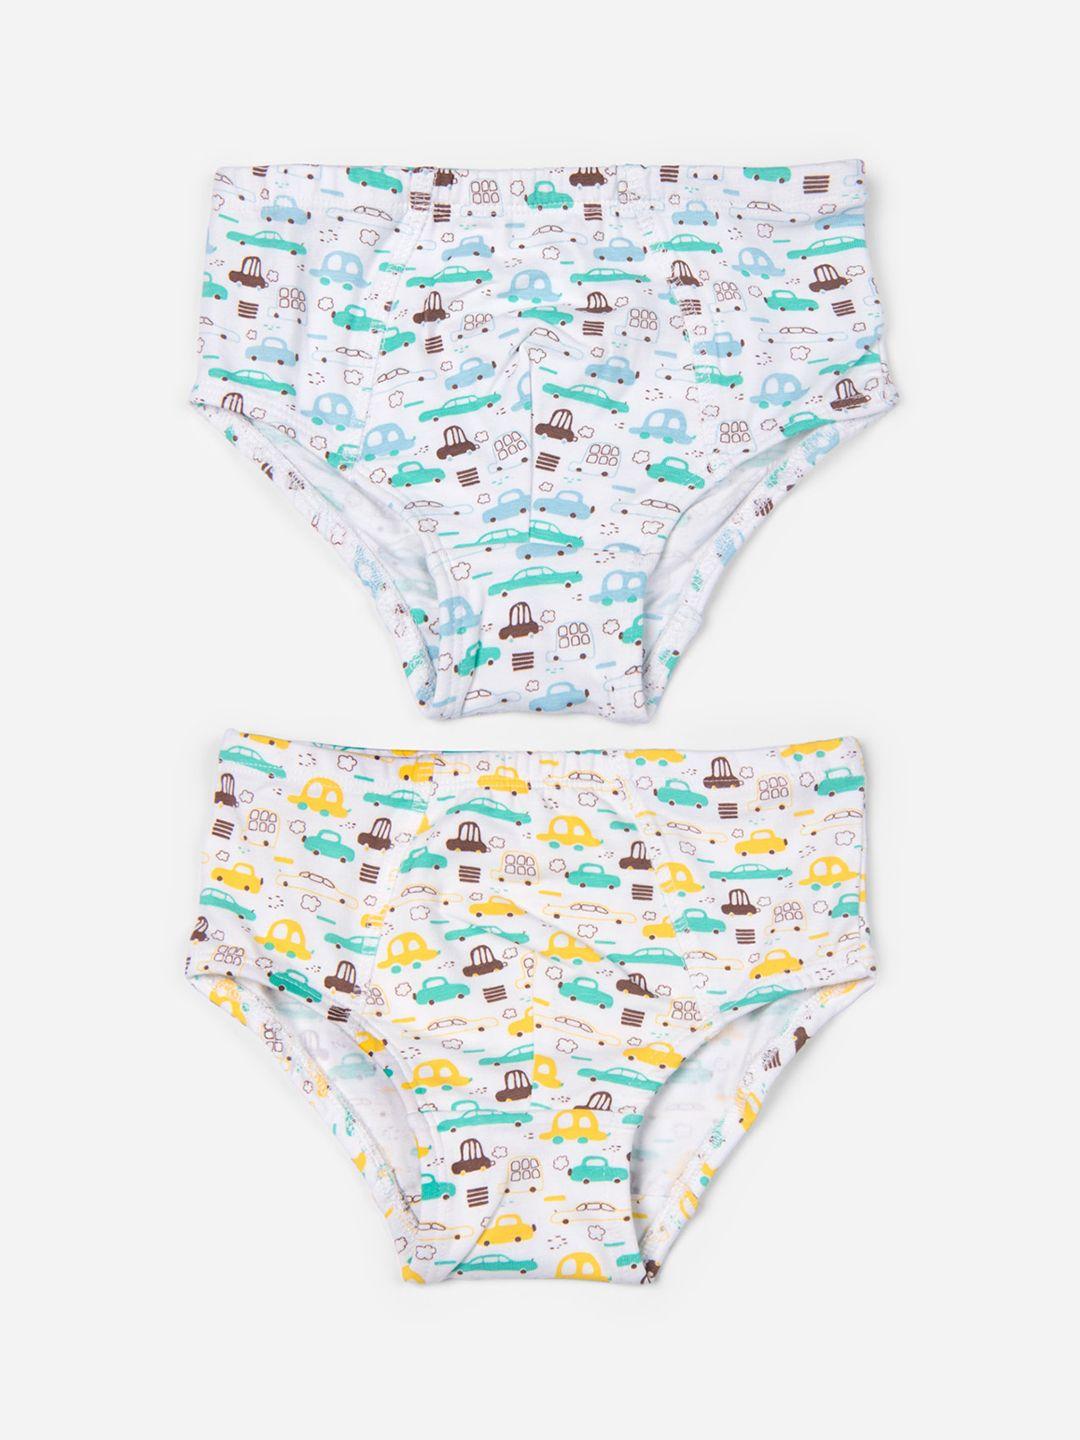 keebee boys pack of 2 printed organic cotton hipster briefs bbrief_rc_1_2